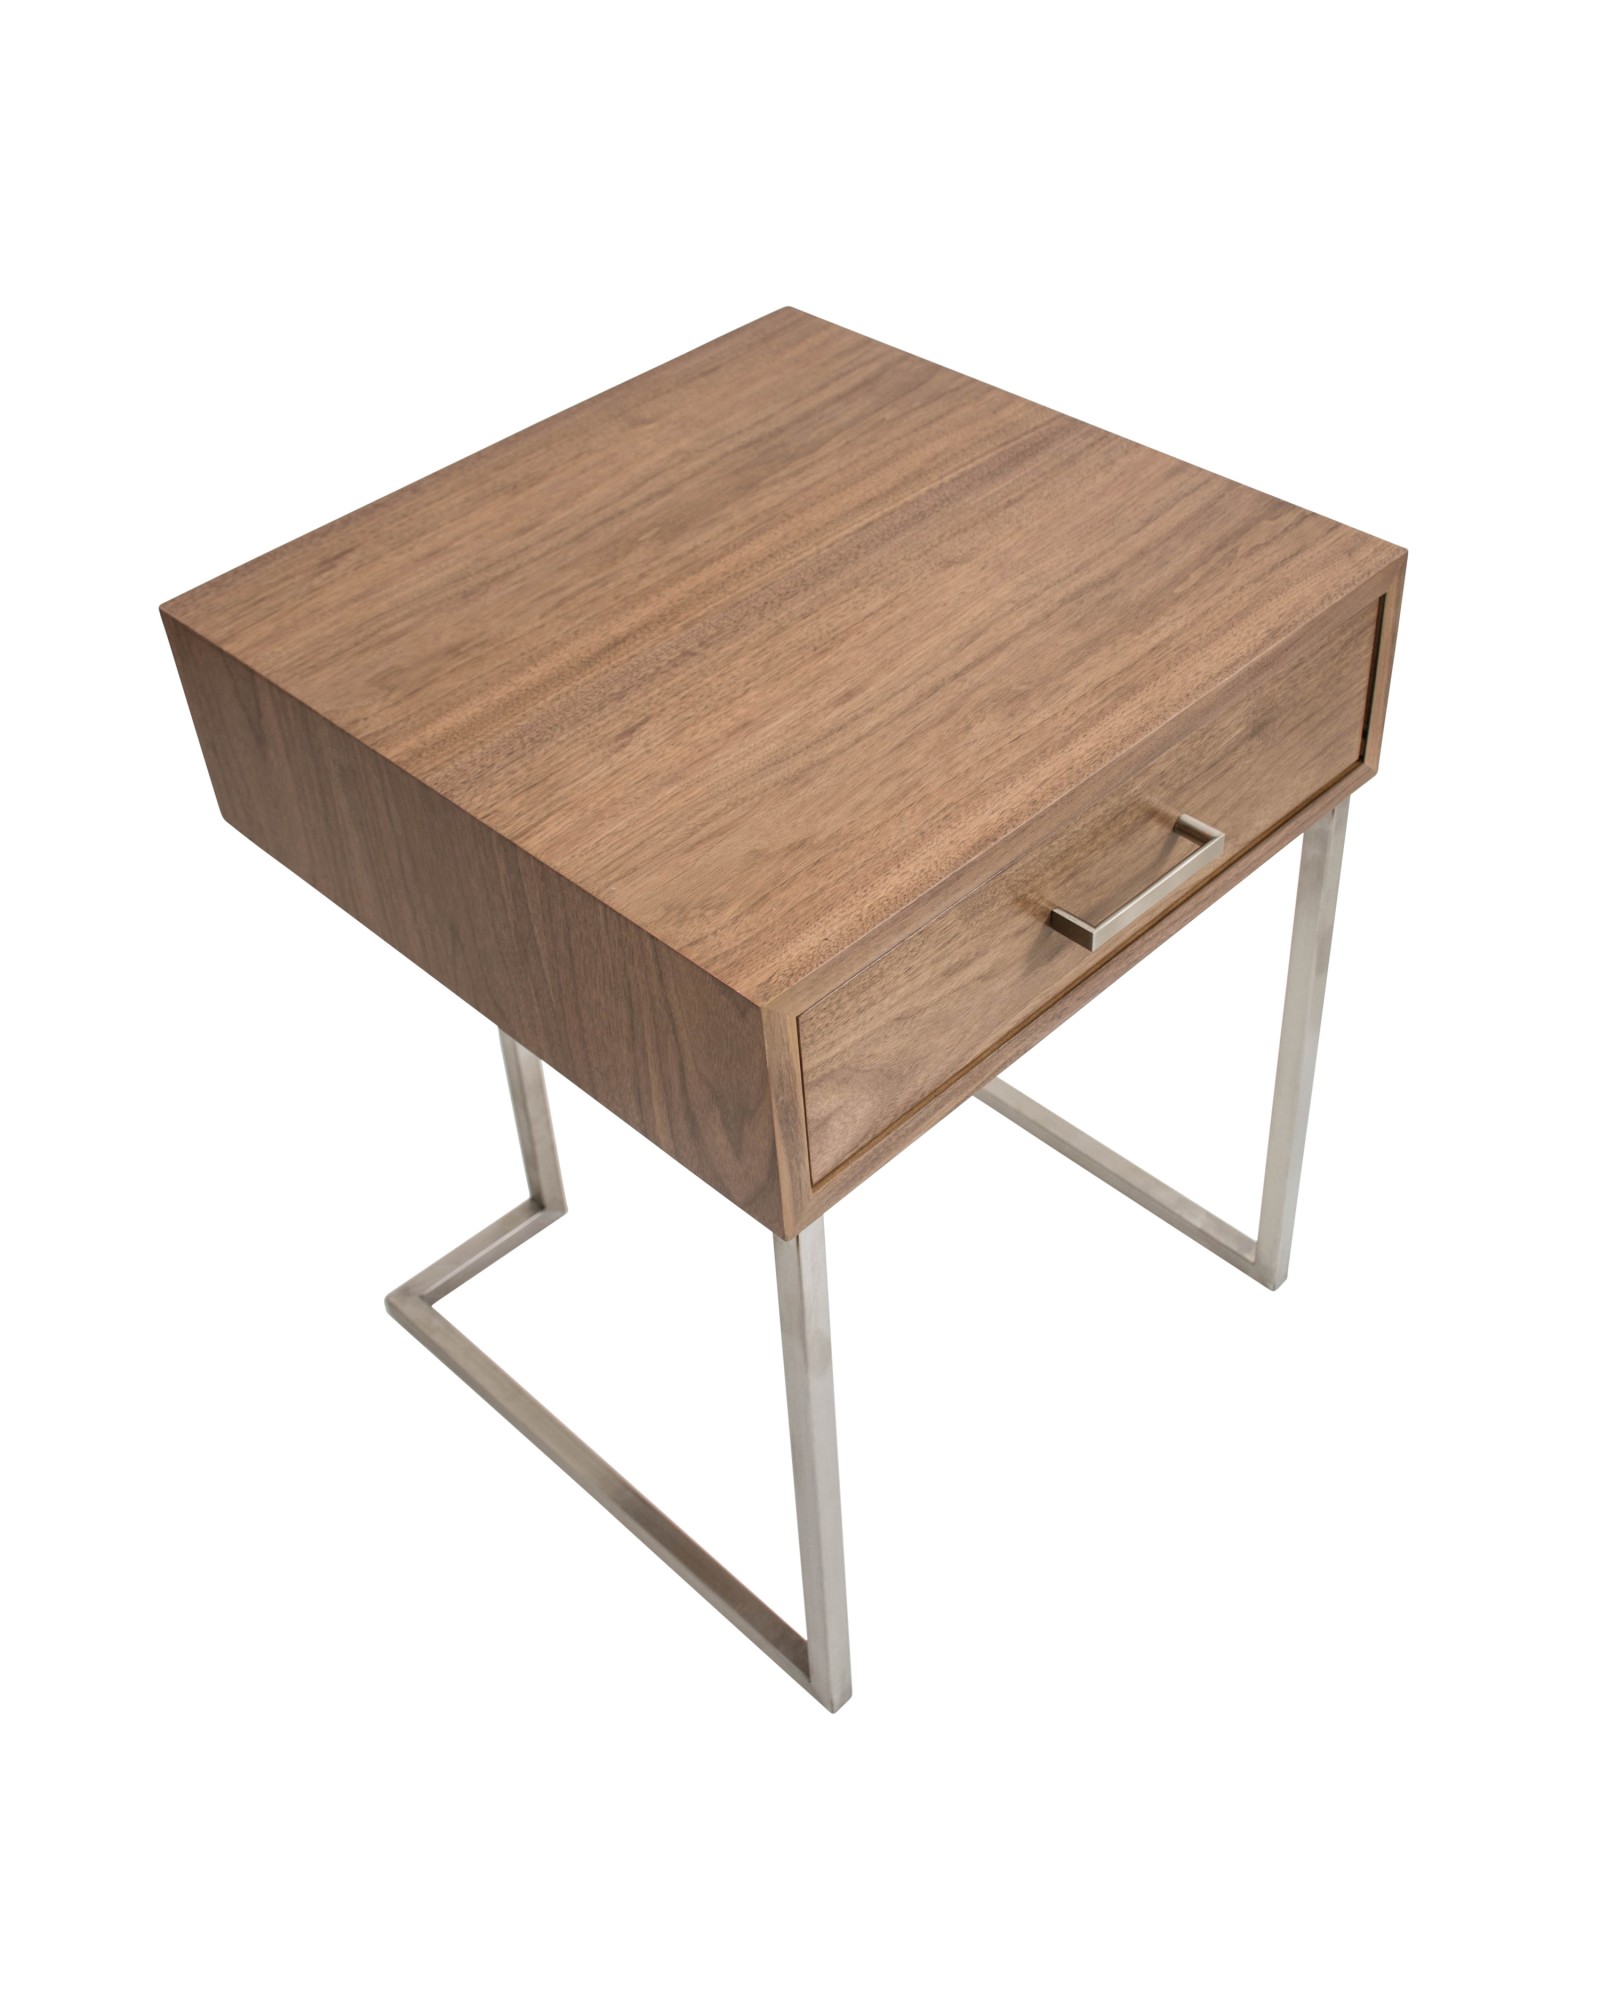 Roman Contemporary End Table in Walnut Wood and Stainless Steel